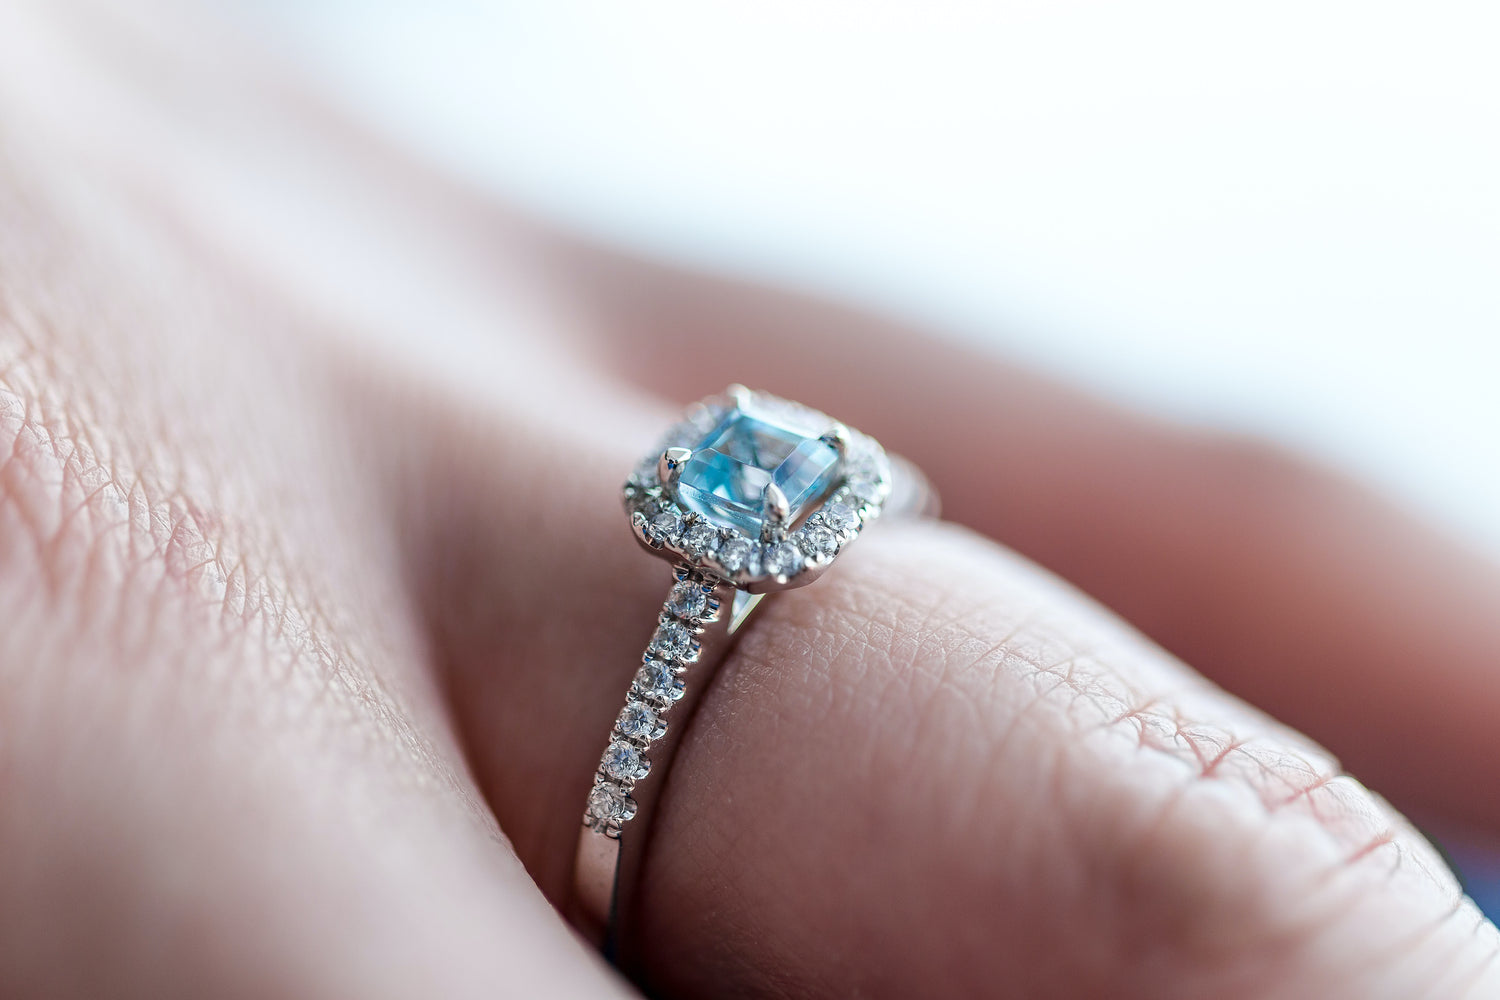 An aquamarine ring on a finger